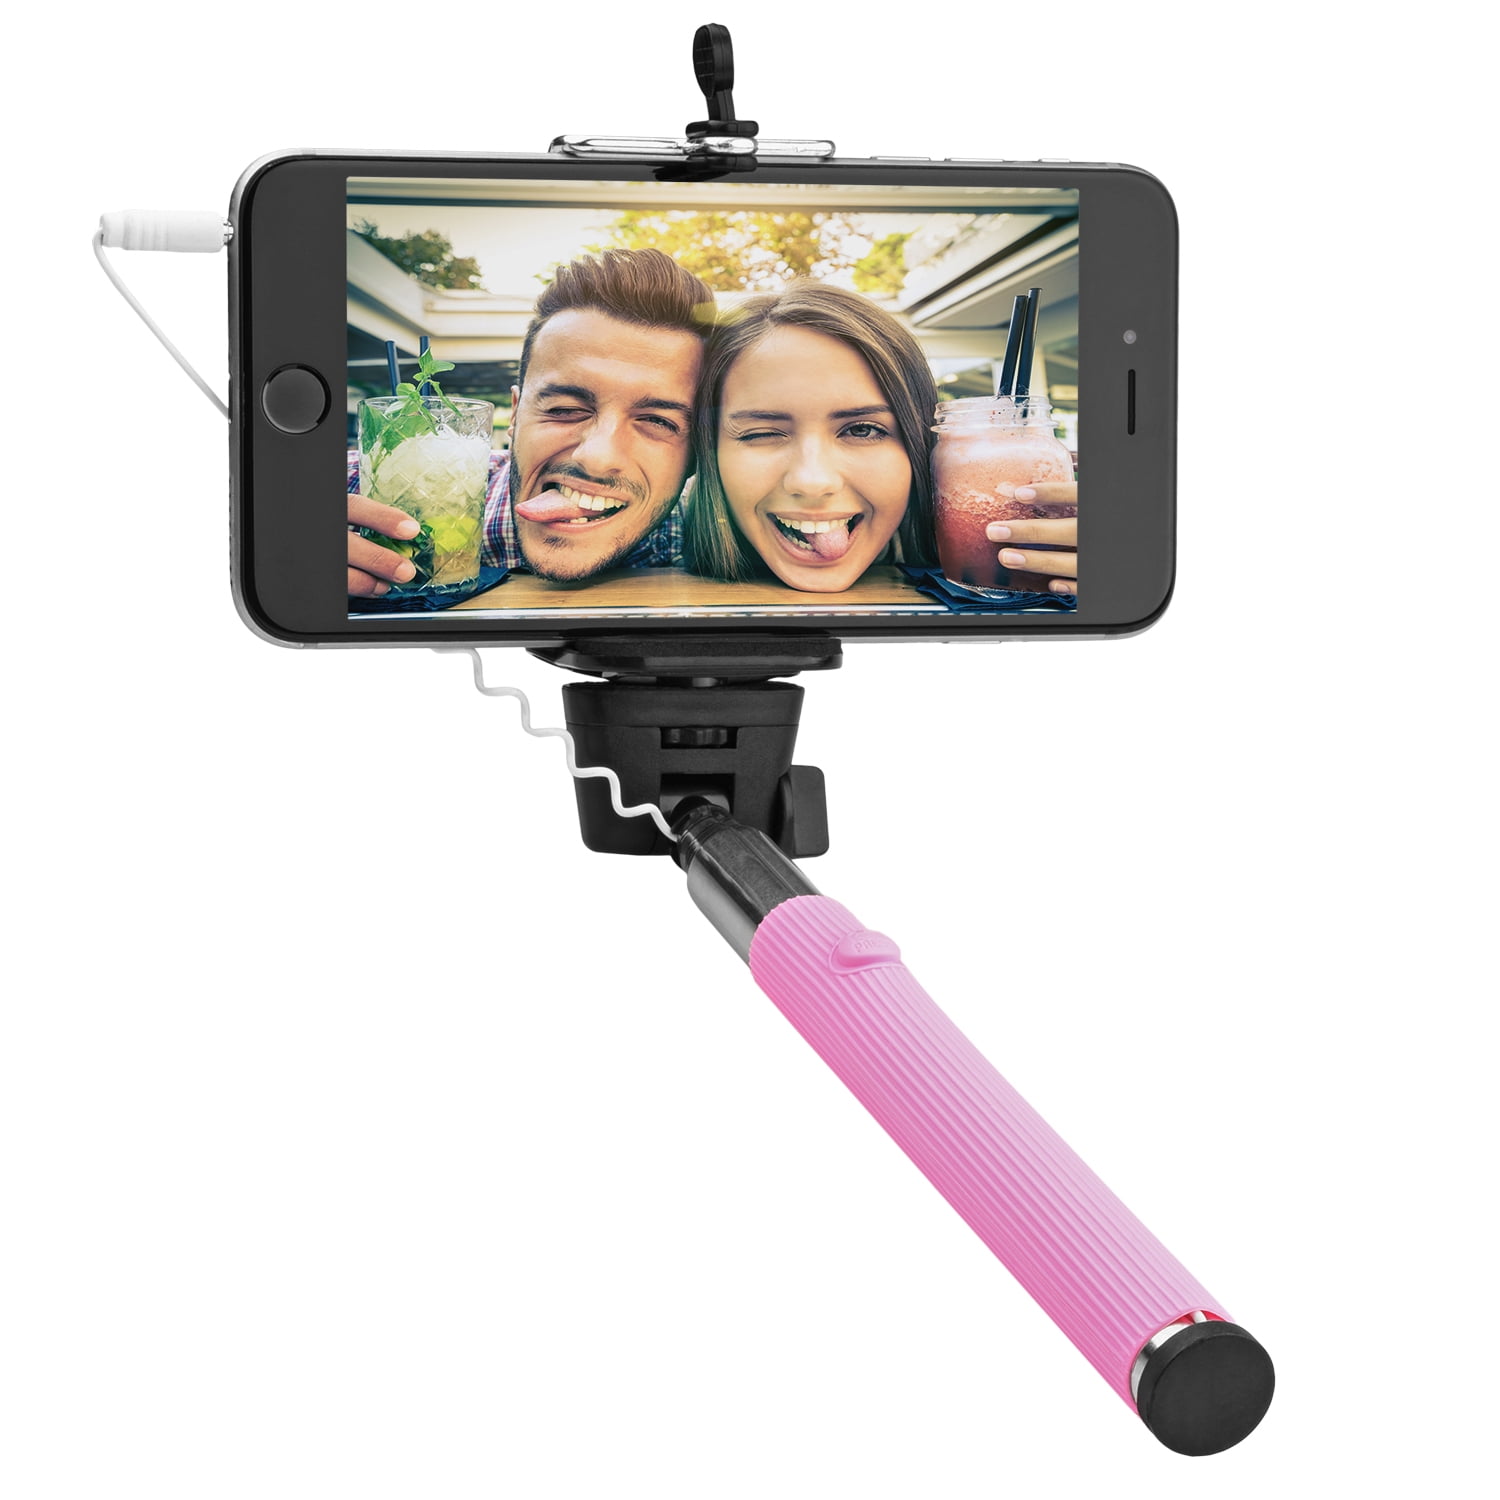 circuit city wired extendable selfie stick with remote control handle | extra-long 42 extending monopod with lanyard | steel telescoping phone holder for iphone 6, 5, 4, samsung s6, s5 & more (pink)